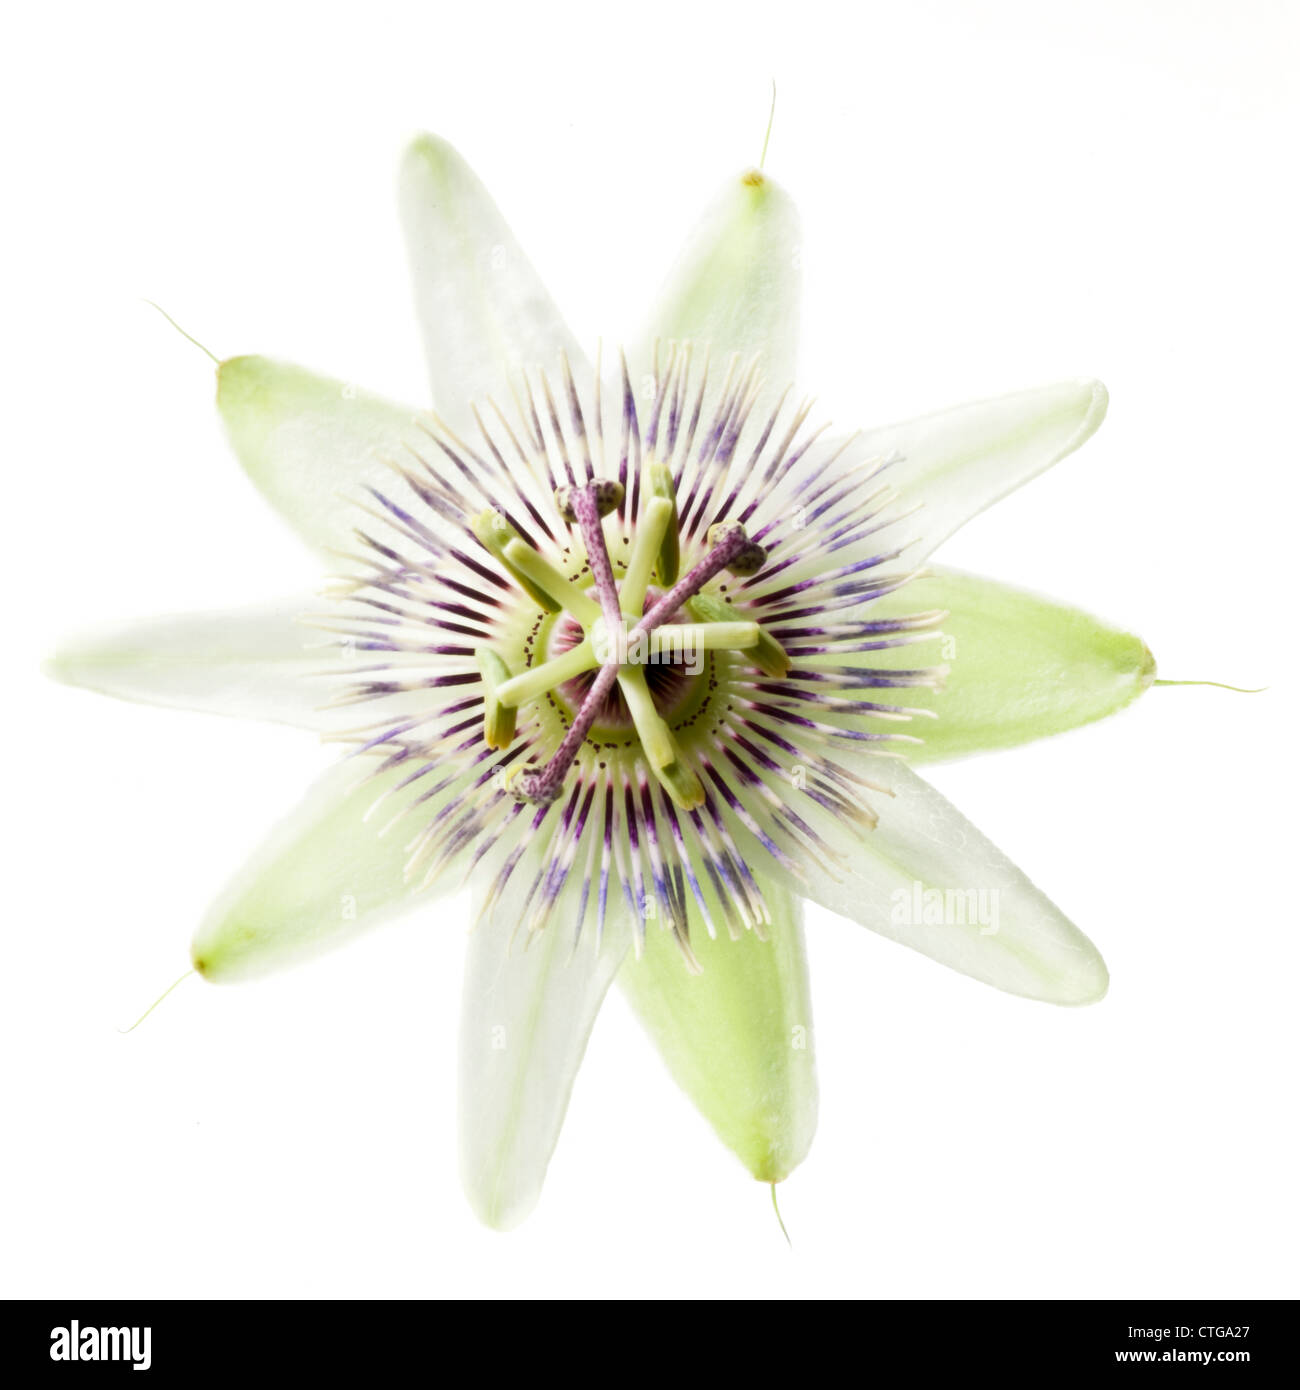 Passiflora caerulea, Top view of a single passion flower against a white background. Stock Photo